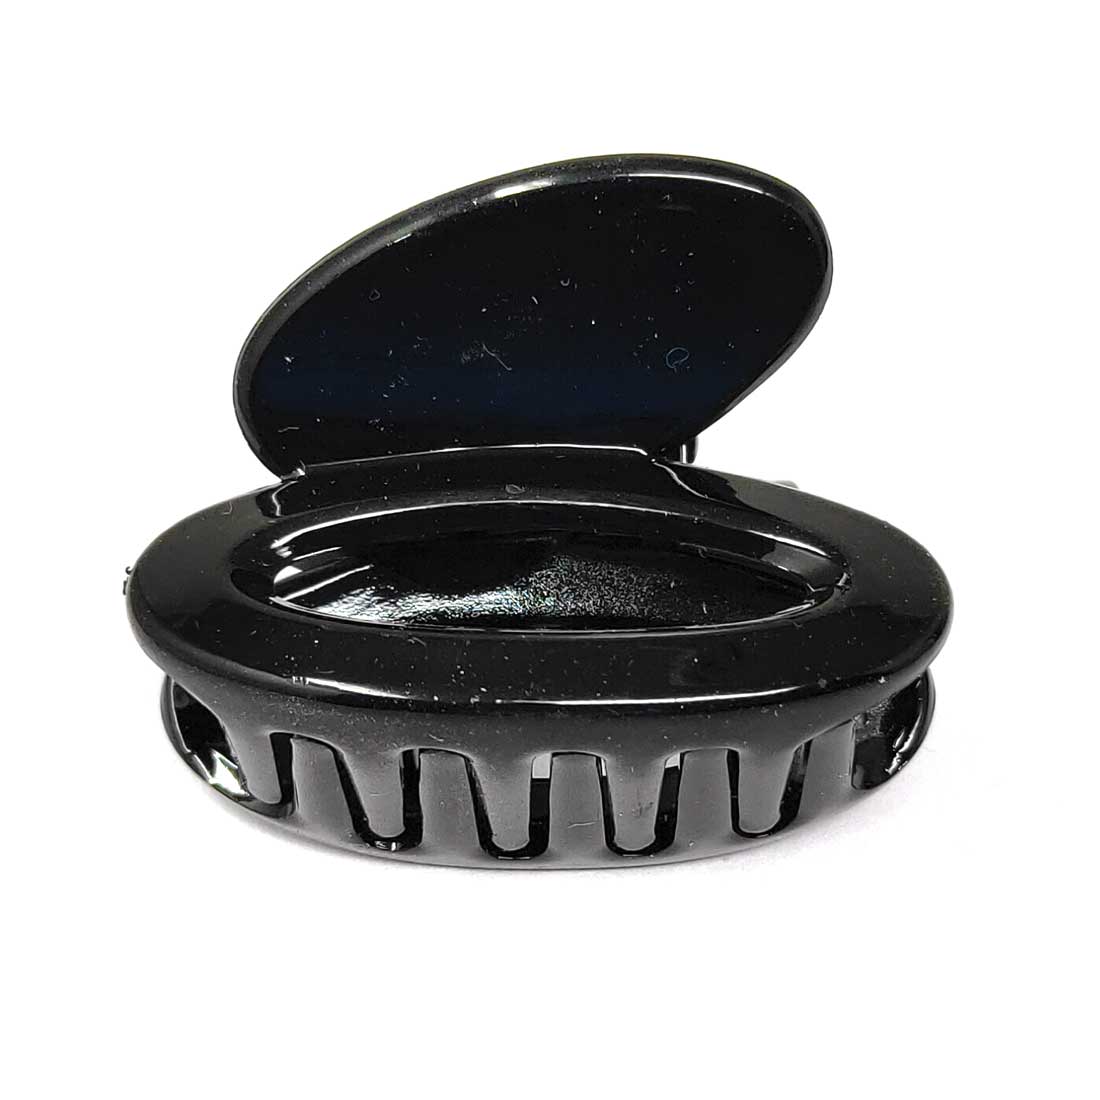 Anokhi Ada Plastic Hair Clutcher/Hair Claw Clip for Girls and Women (Black, Pack of 2) - 01-11C